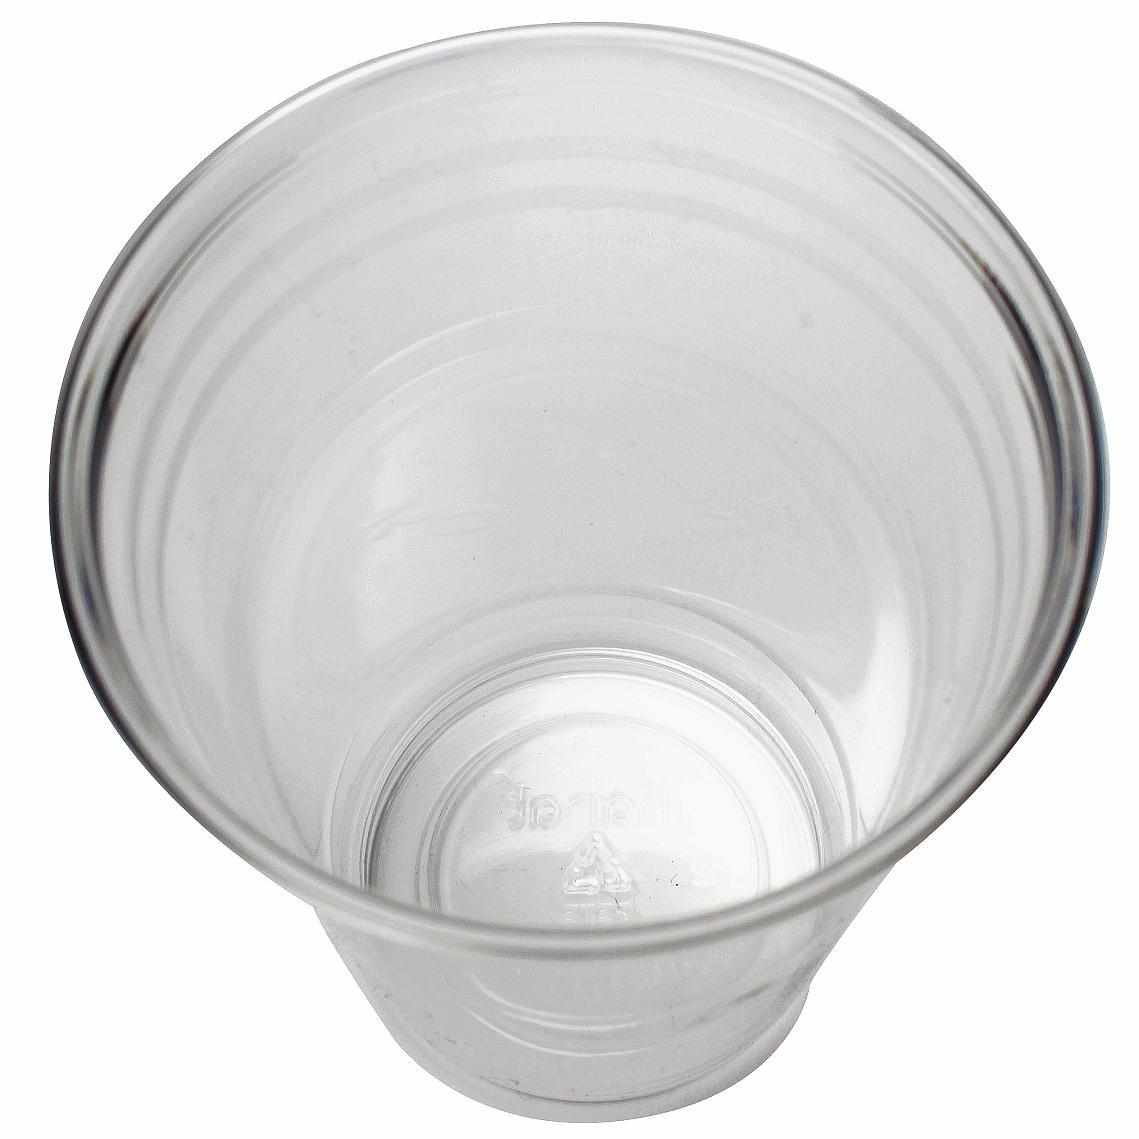 New Year's 16-Ounce Plastic Cups – KOVOT